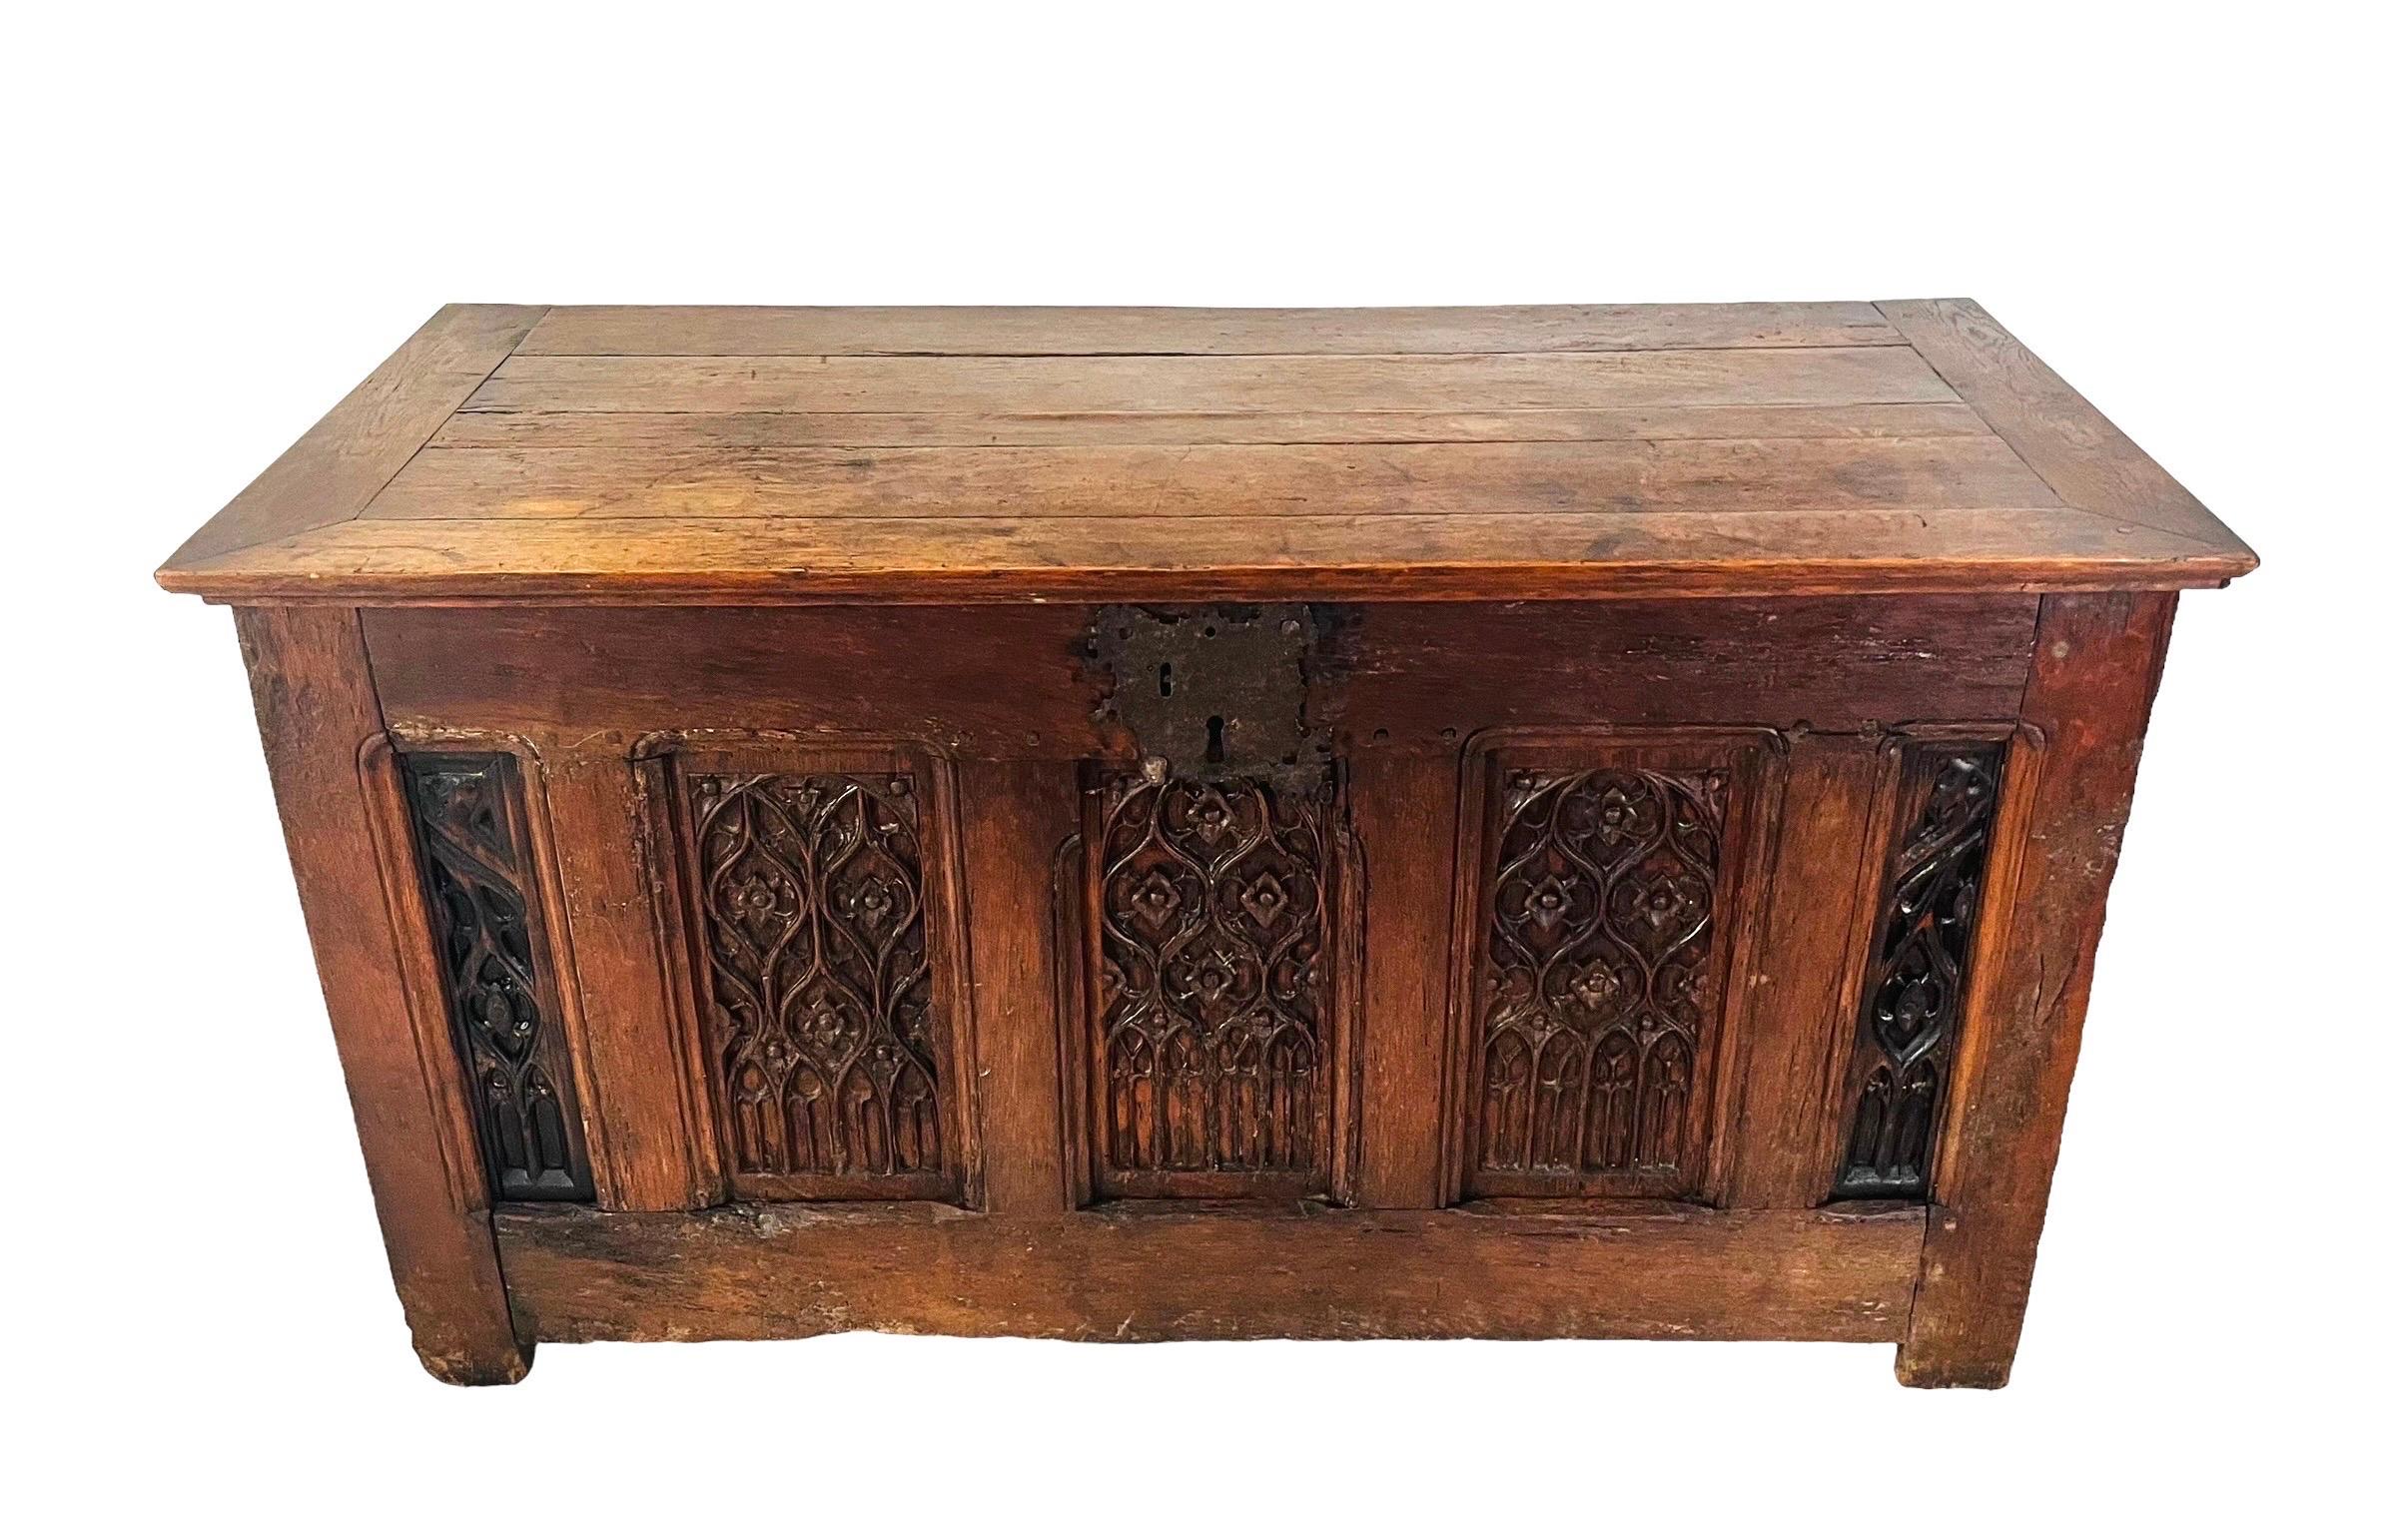 Large solid oak chest from the 16th century Gothic period
Very pretty French, Norman work.
Decorated with Gothic motifs on 5 panels on the facade.

Note reassembly in the 18th and 19th centuries.

Hand forged iron lock.

16th century - France -